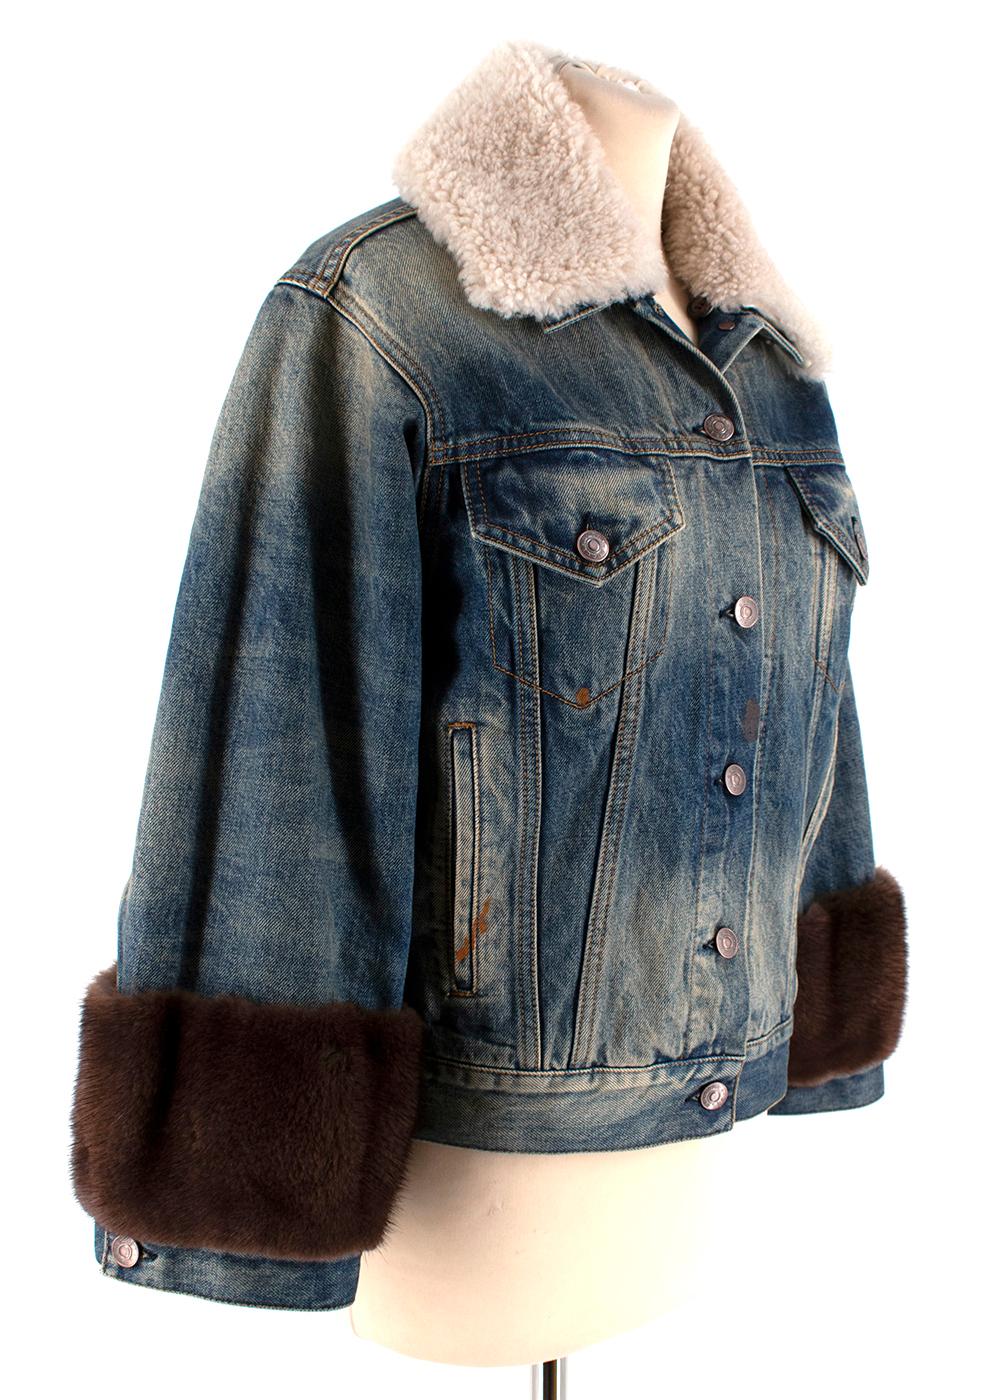 Gucci Guccification Denim Jacket with Mink Fur Trim & Shearling Collar

- Stonewashed Effect
- Mink Fur Sleeve Detail 
- Lamb Fur Turnover Collar
- Red and White Guccification Print 
- Front Button Fastening 
- Button Cuffs
- Two Chest Pockets and